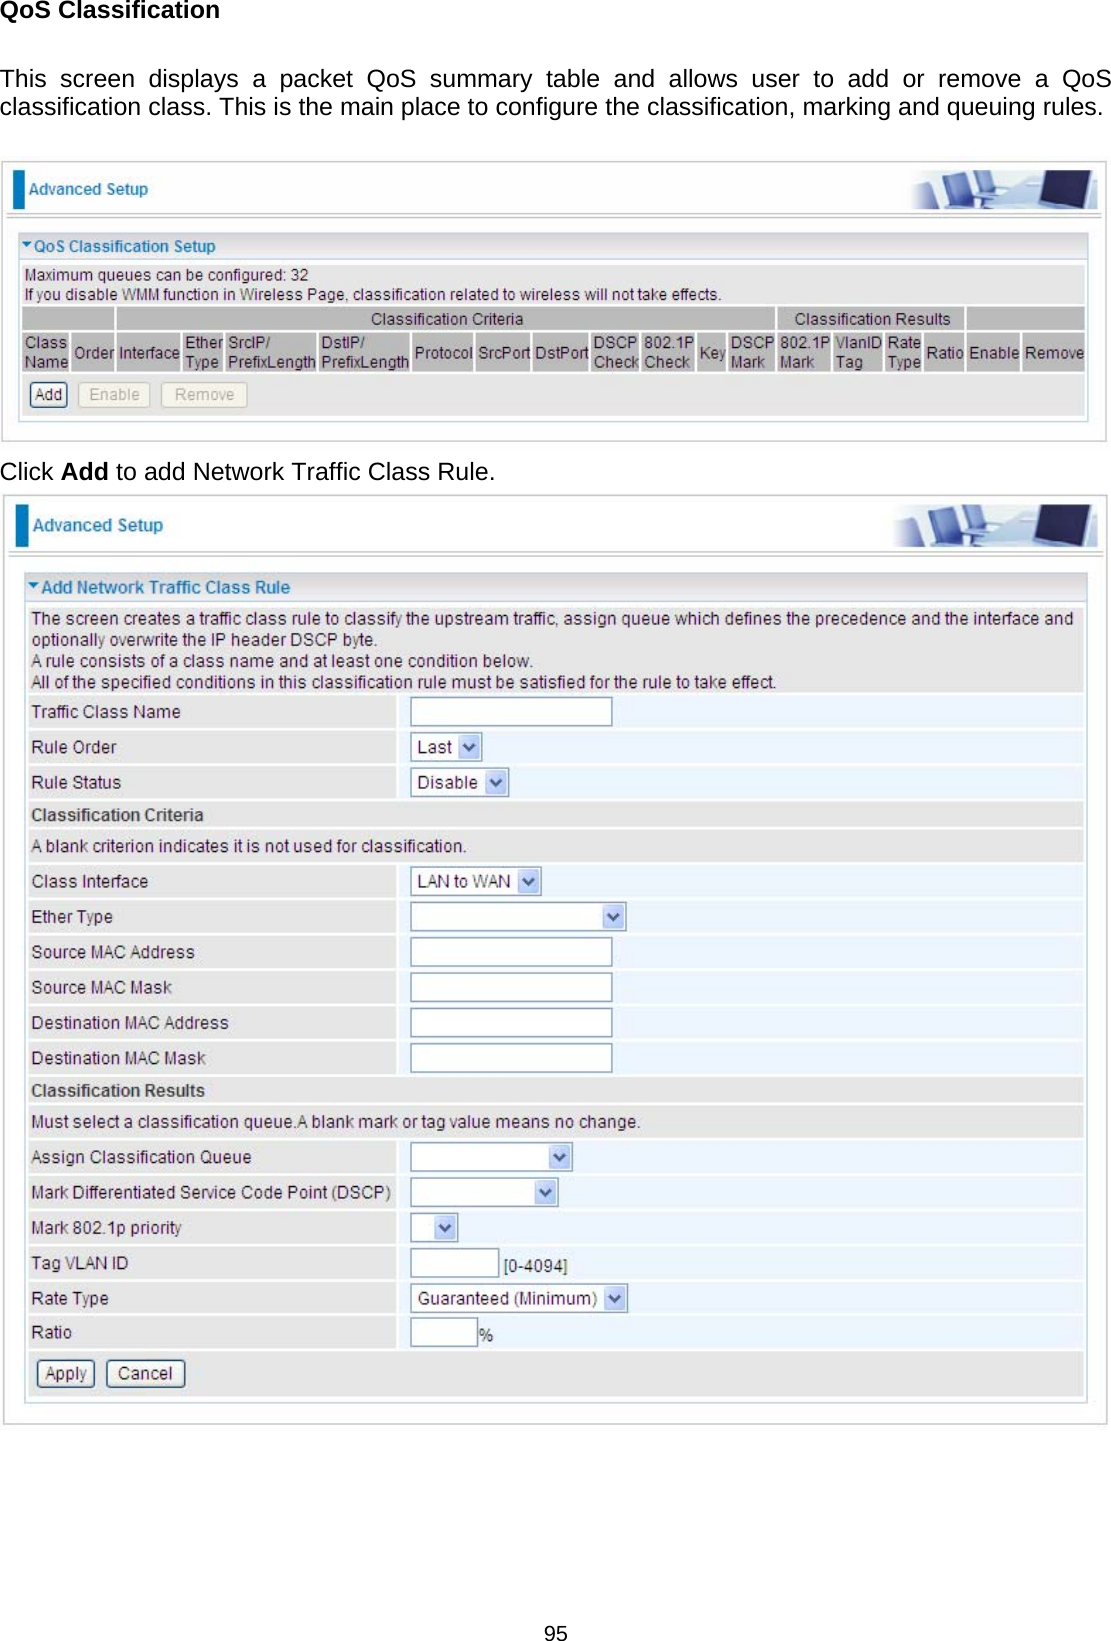  95 QoS Classification  This screen displays a packet QoS summary table and allows user to add or remove a QoS classification class. This is the main place to configure the classification, marking and queuing rules.   Click Add to add Network Traffic Class Rule.      